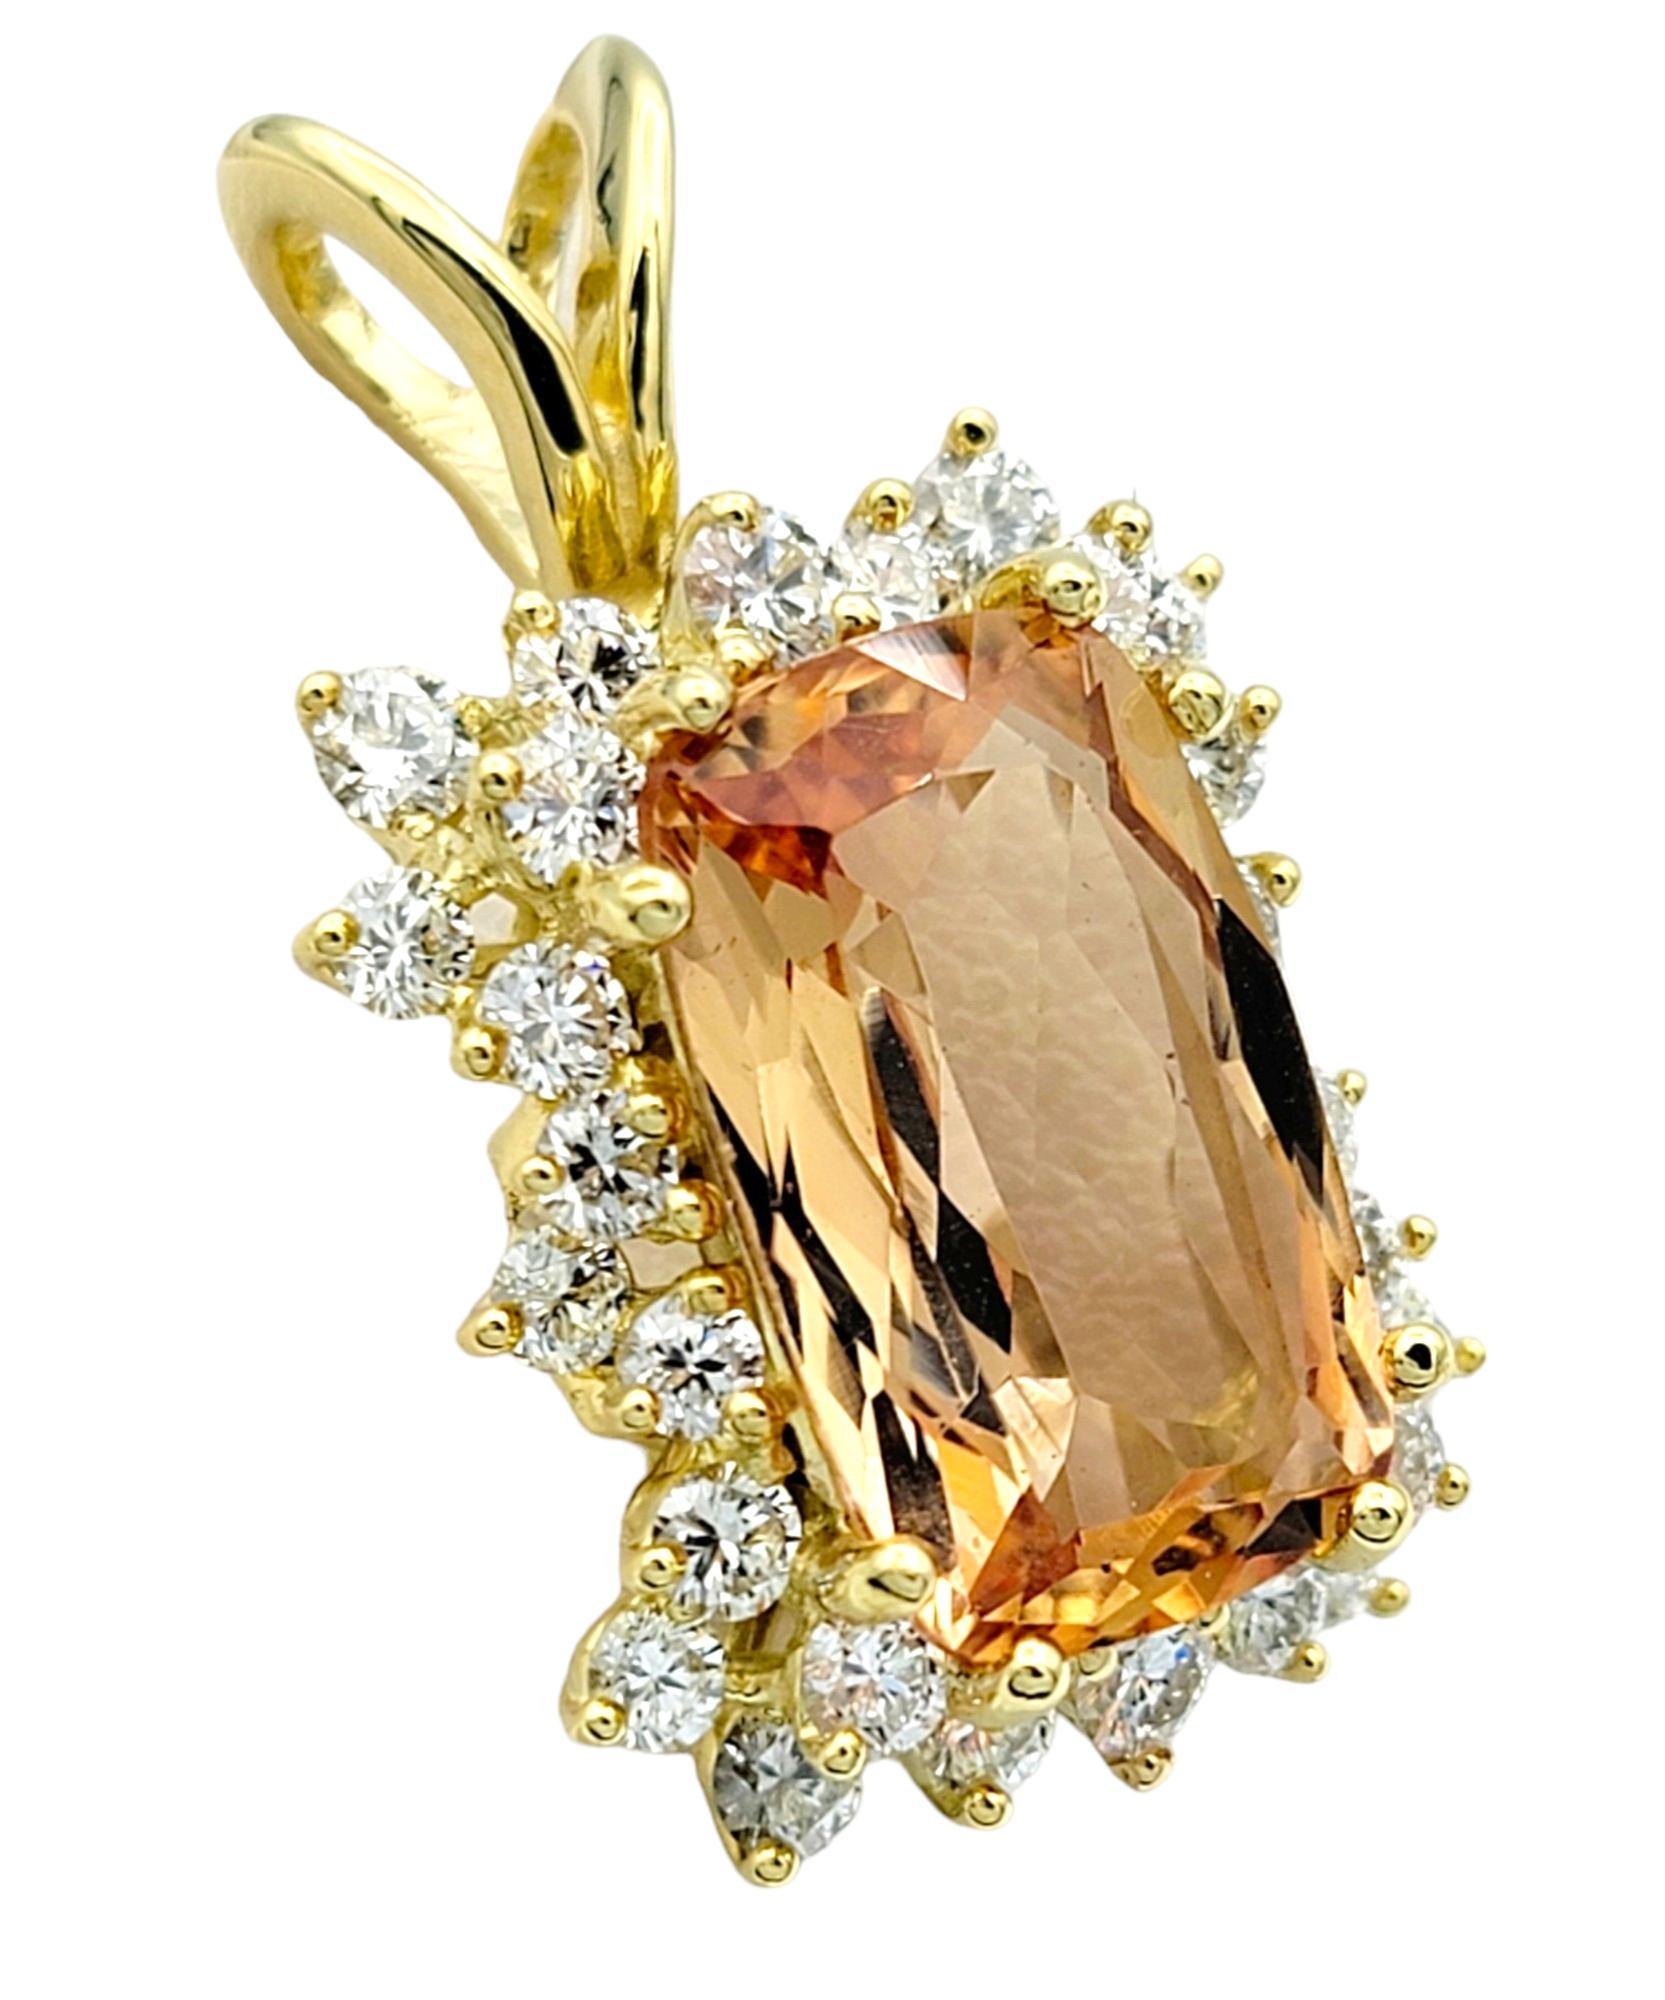 This beautiful large cushion peach topaz pendant exudes warmth and radiance, set in luxurious 18 karat yellow gold. The centerpiece, a captivating peach topaz gemstone, is expertly cut into a cushion shape, showcasing its vibrant hue and natural